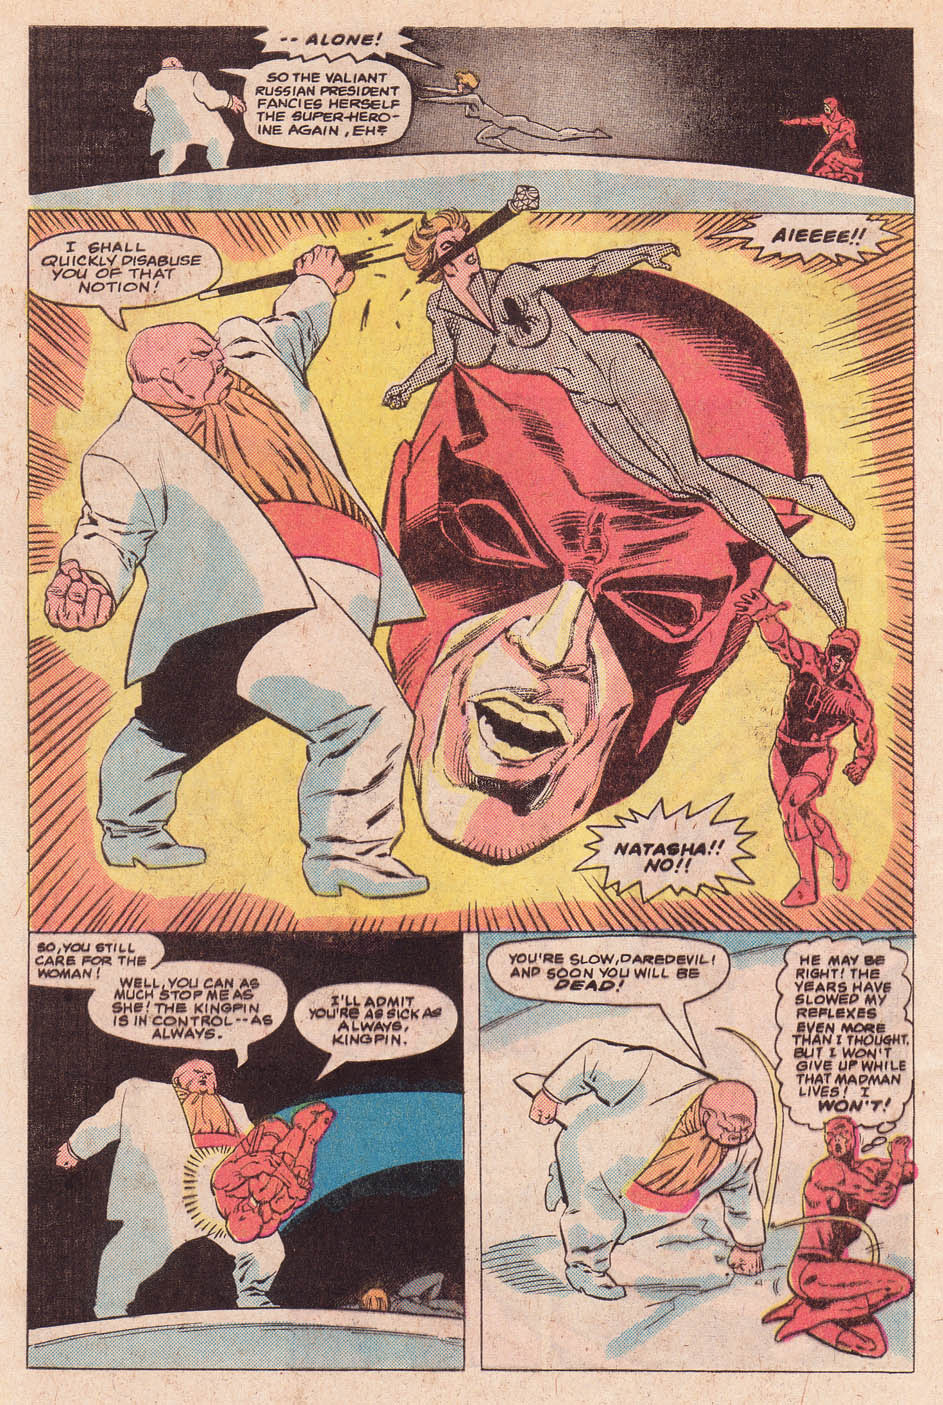 What If? (1977) issue 38 - Daredevil and Captain America - Page 38